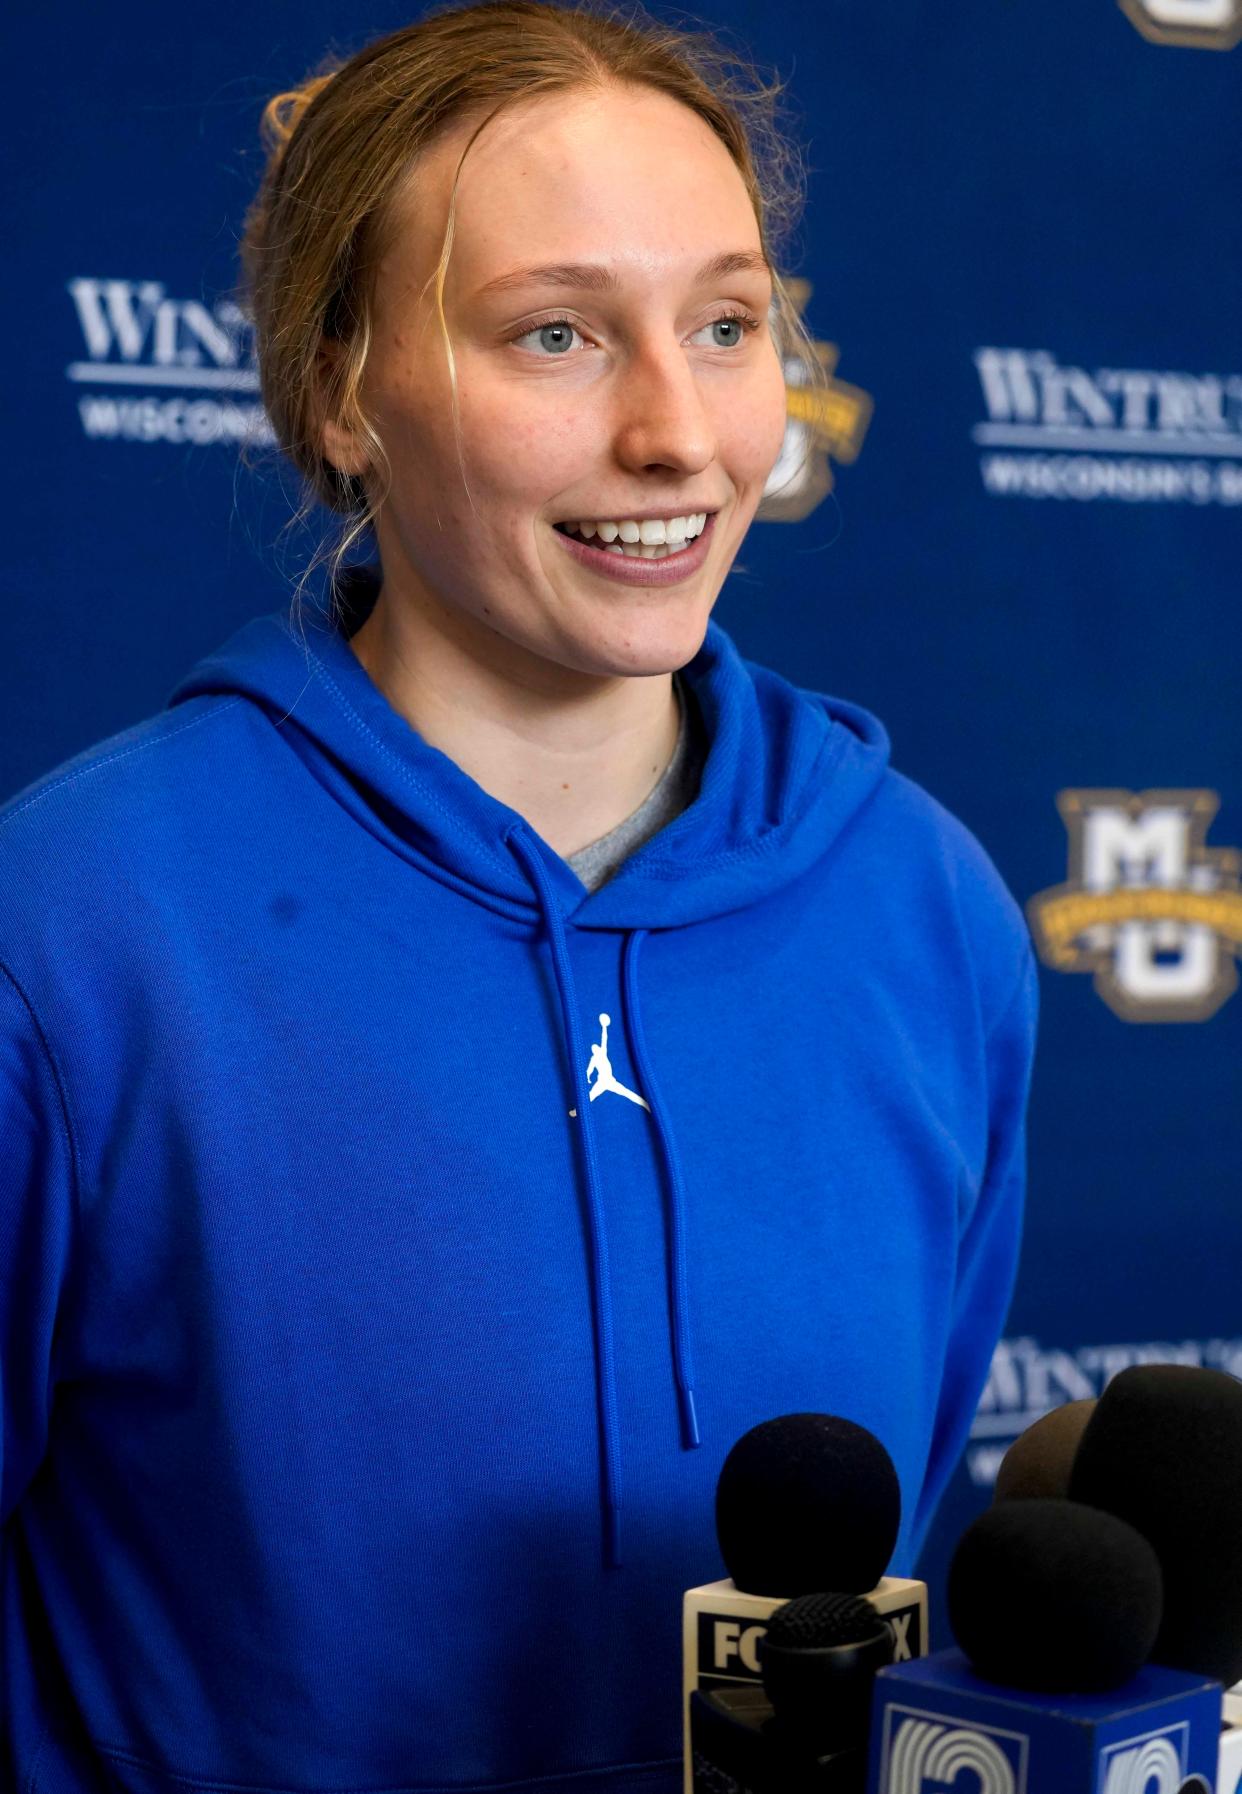 Marquette's Liza Karlen has sharpened her analytical skills as an engineering major.